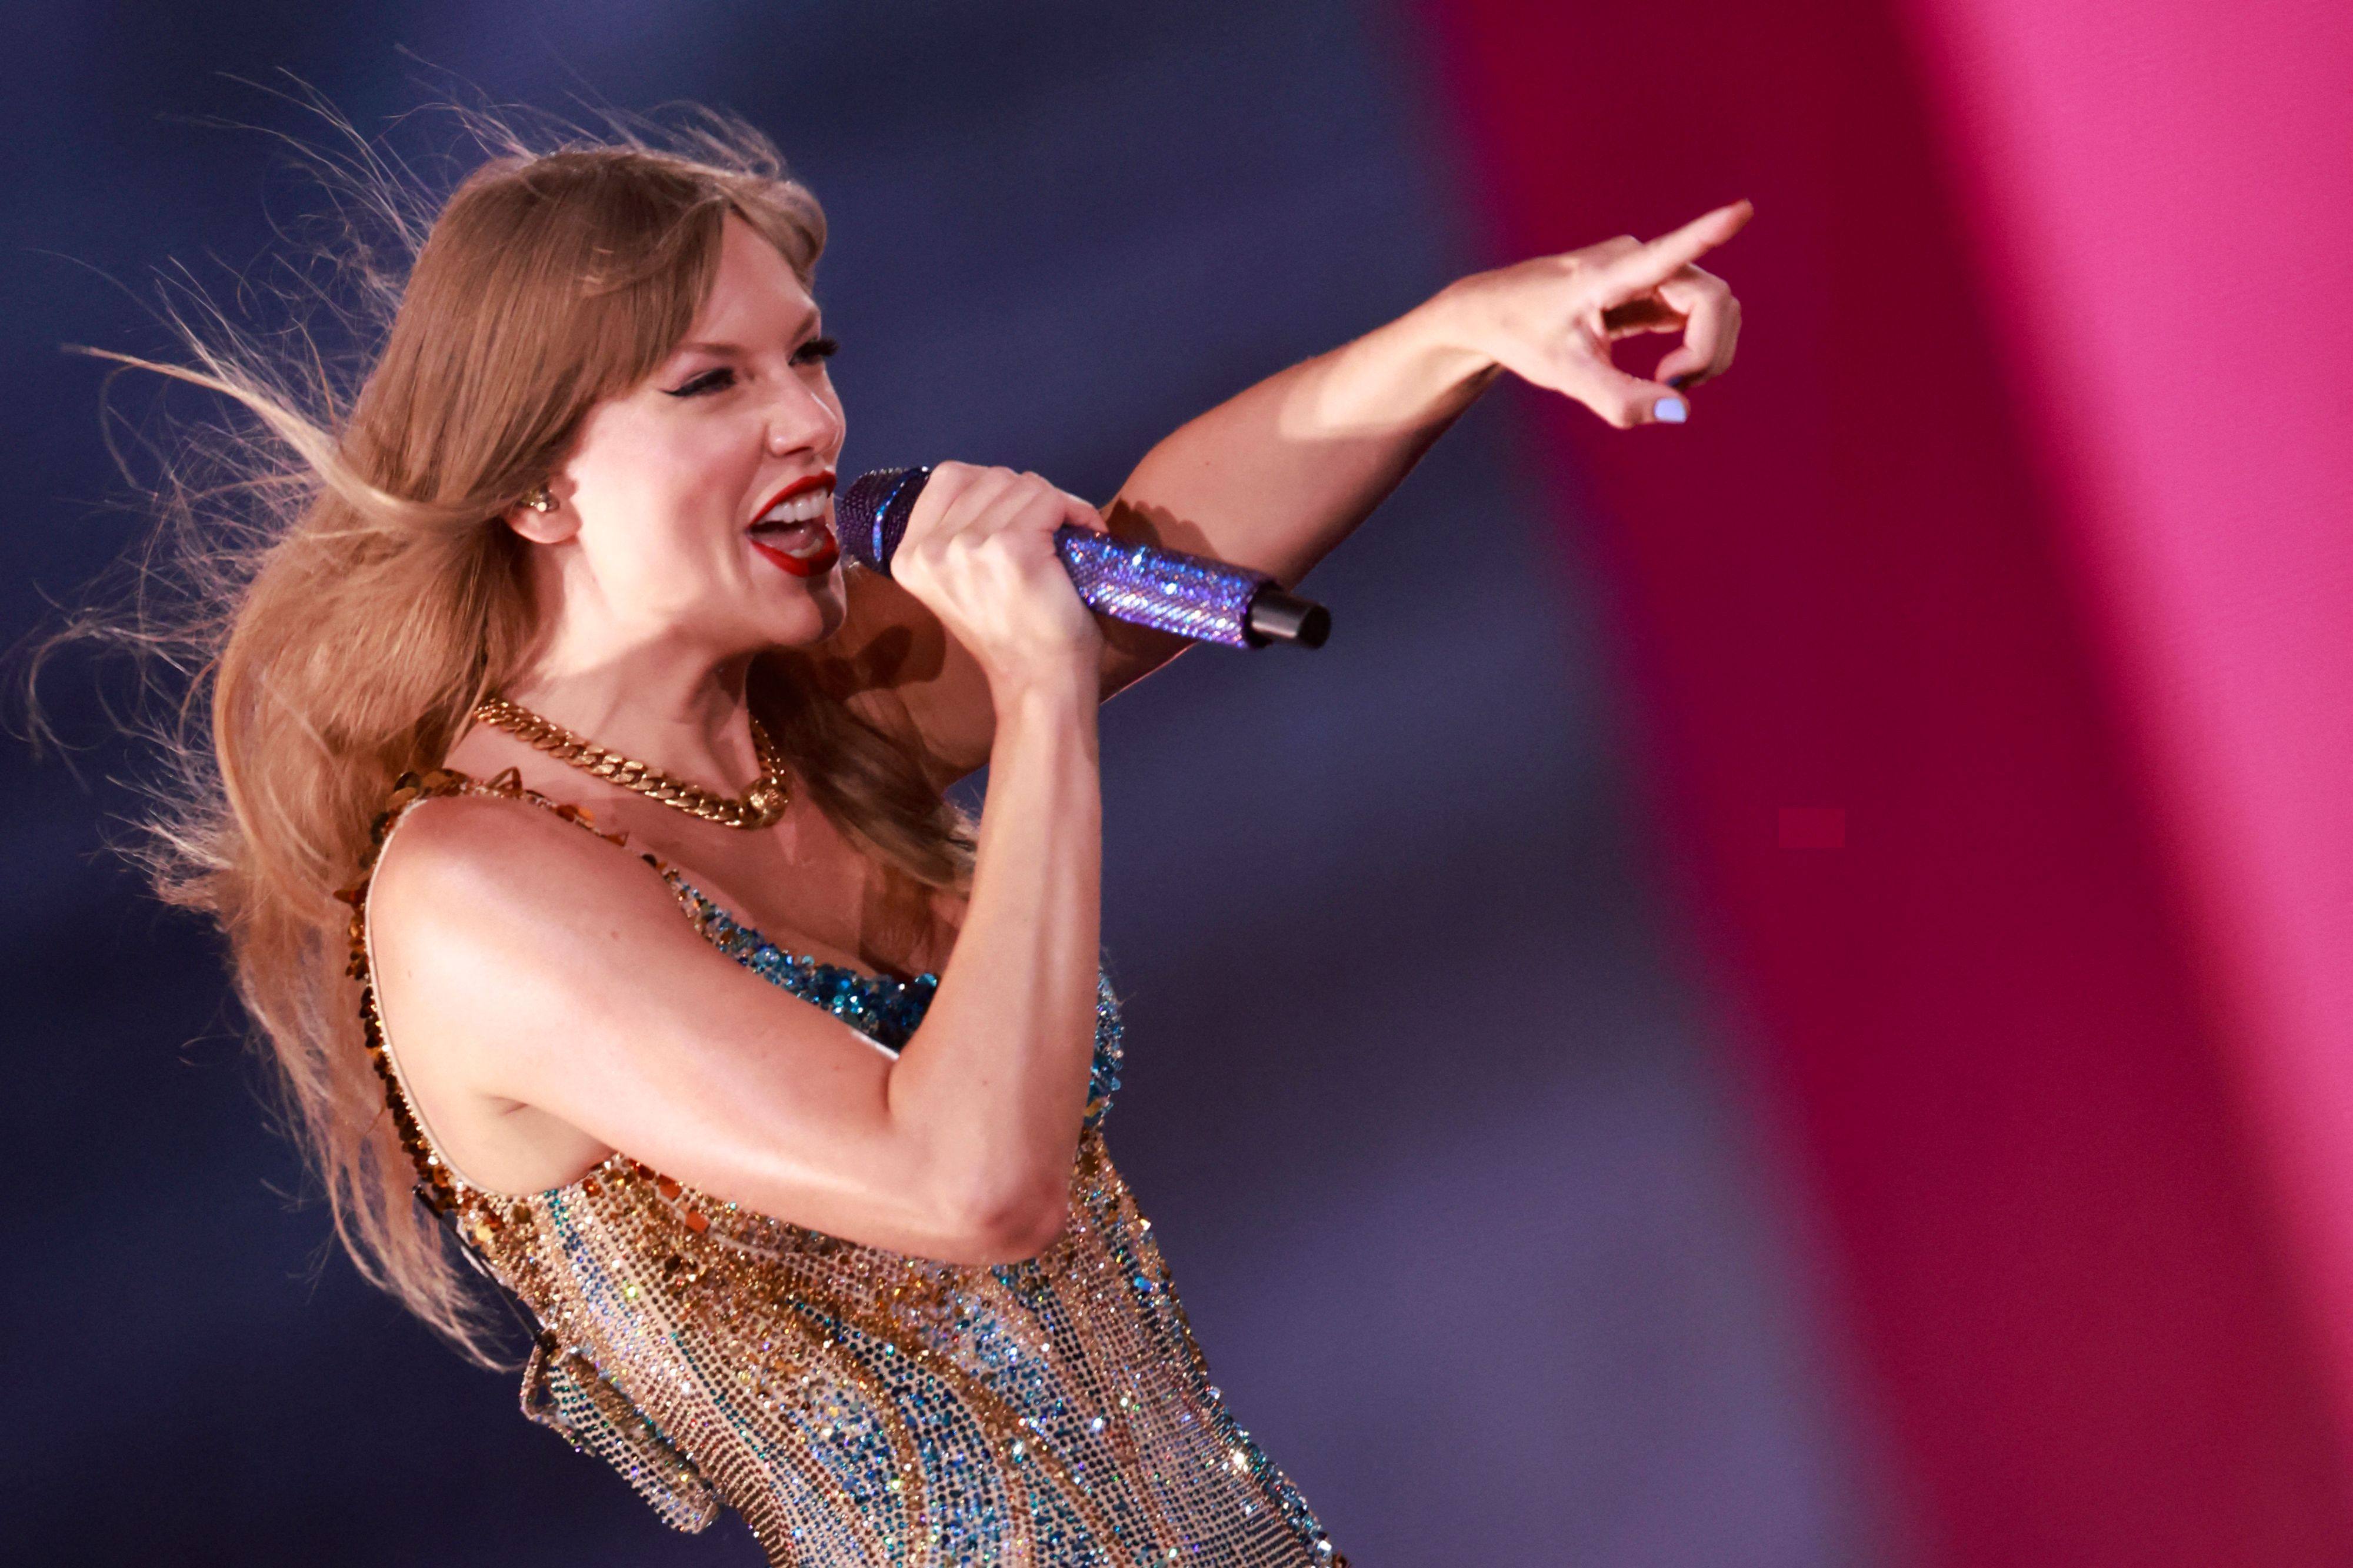 The head of Australia’s central bank said the ‘Taylor Swift inflation’ effect has forced fans to adjust their spending to afford tour tickets and associated spending. Photo: AFP